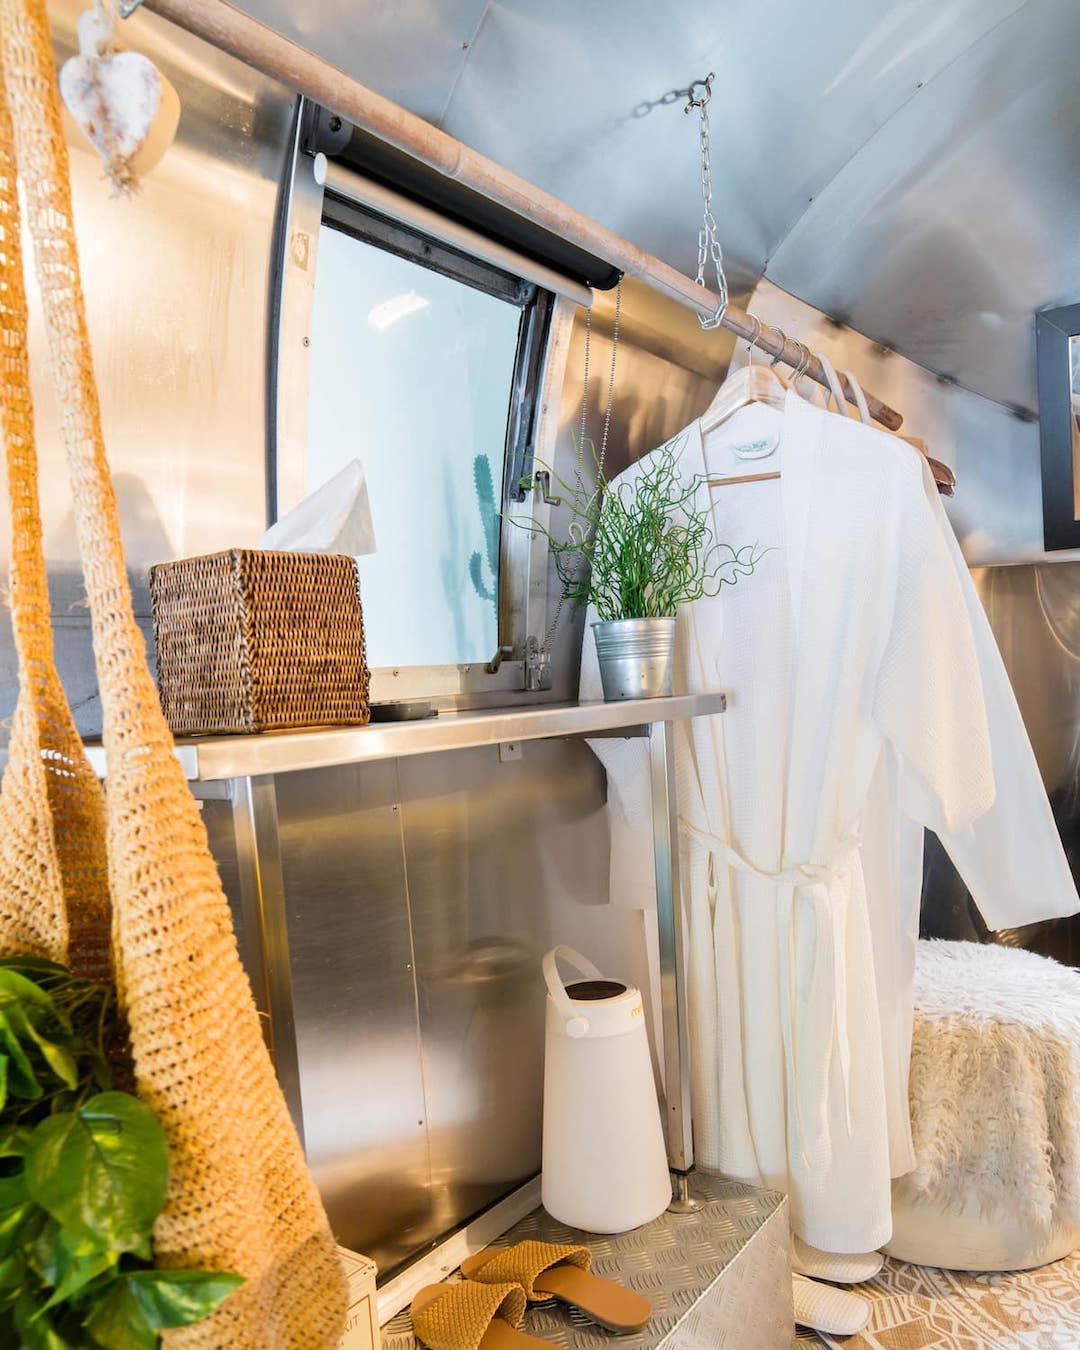 The interior of an Airstream with a robe hanging.